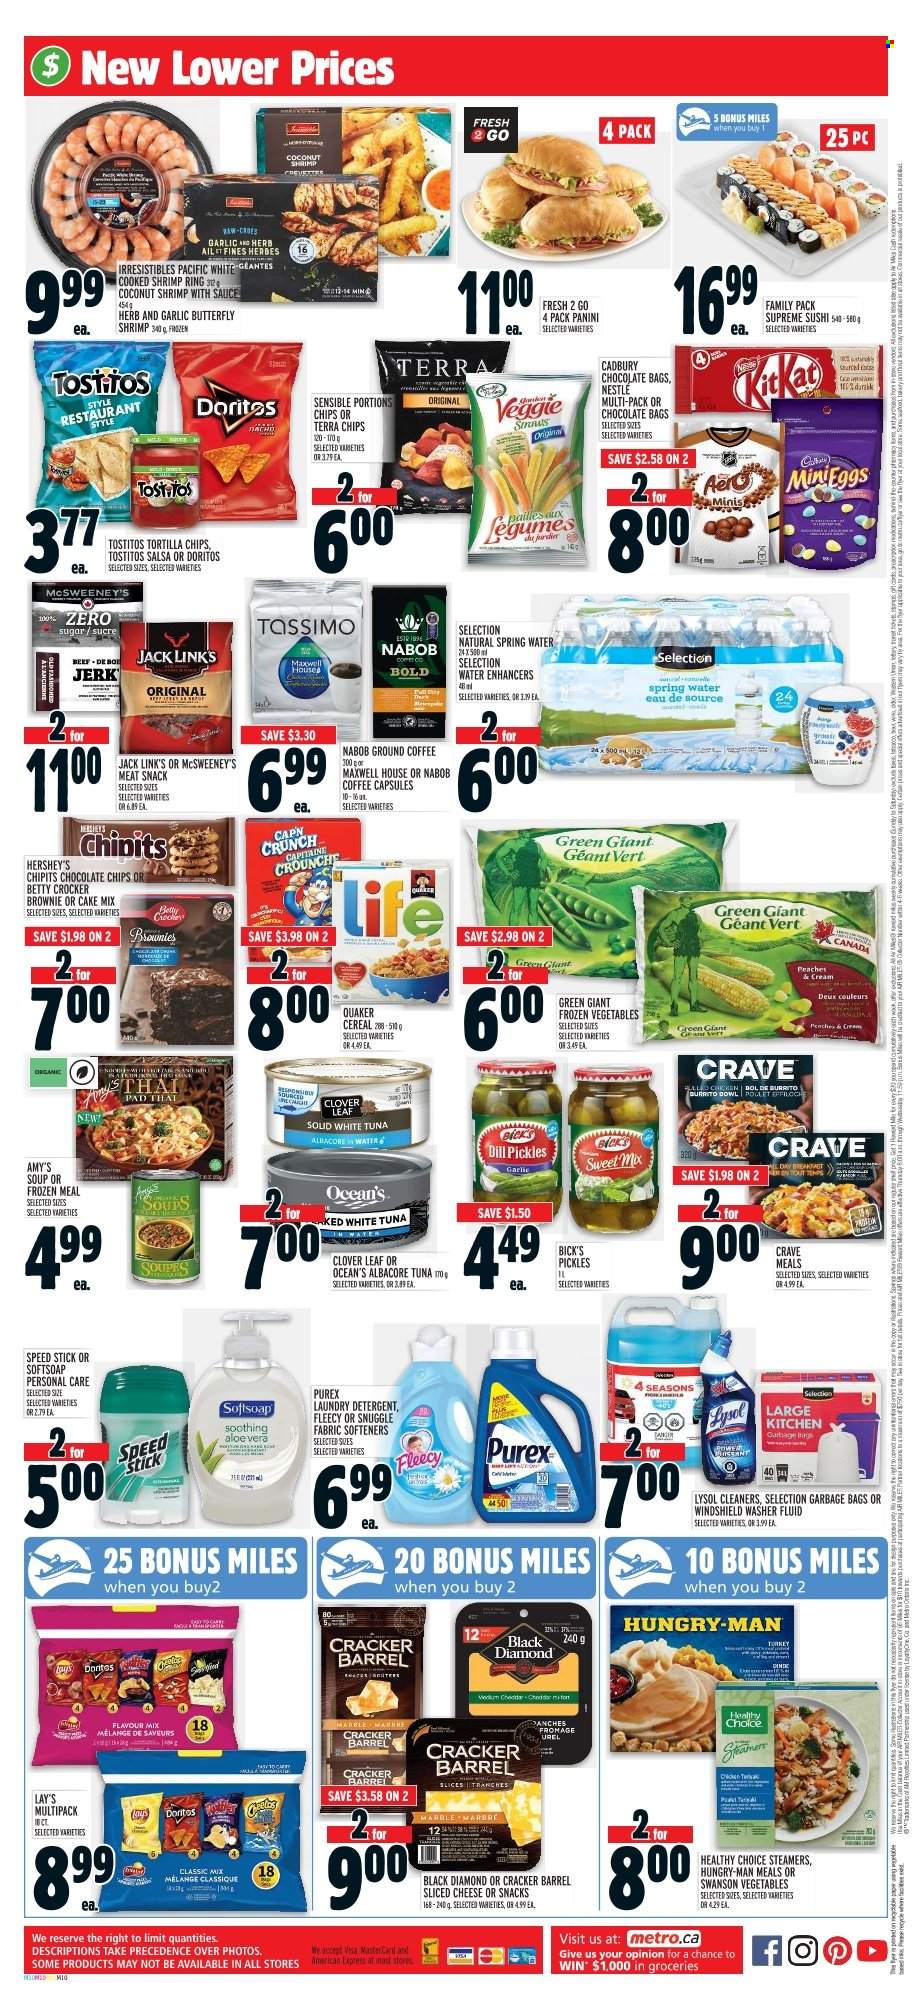 thumbnail - Metro Flyer - February 02, 2023 - February 08, 2023 - Sales products - panini, cake mix, garlic, peaches, tuna, shrimps, soup, burrito, Quaker, Healthy Choice, sliced cheese, Clover, Hershey's, frozen vegetables, crackers, Cadbury, Doritos, tortilla chips, Lay’s, Tostitos, Jack Link's, pickles, cereals, dill, herbs, salsa, spring water, Maxwell House, coffee, ground coffee, coffee capsules, Lysol, Snuggle, laundry detergent, Purex, Softsoap, Speed Stick, detergent, Nestlé. Page 2.